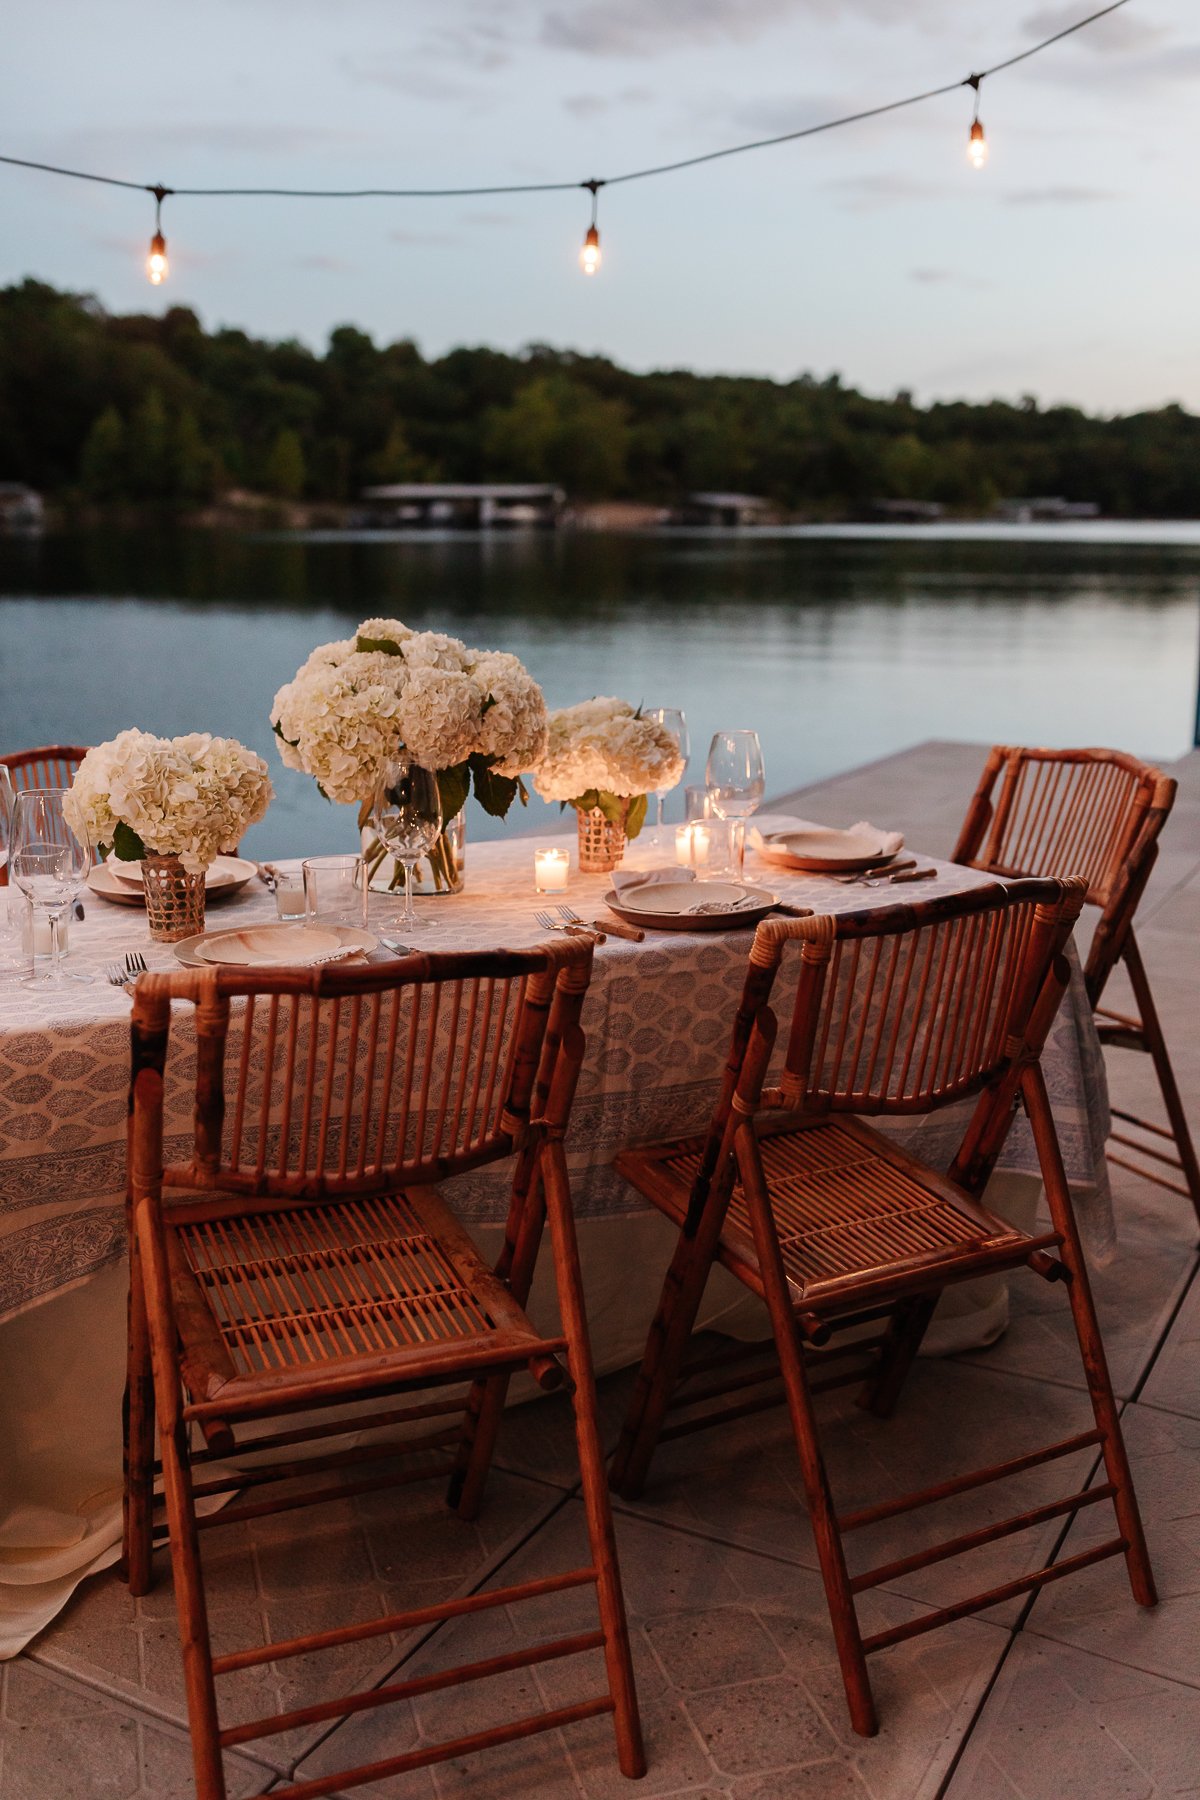 A blue and white table cloth set with bamboo plates and an al fresco dining view of the water